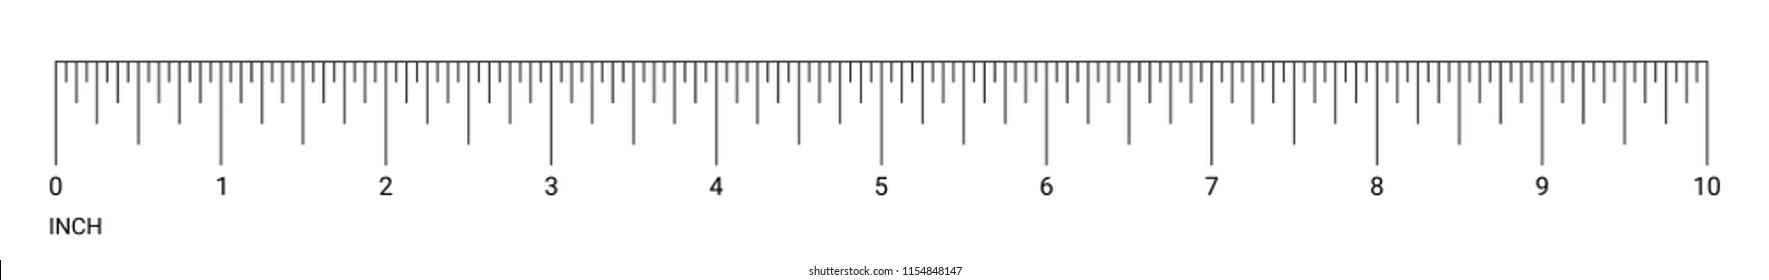 measuring inches with a ruler